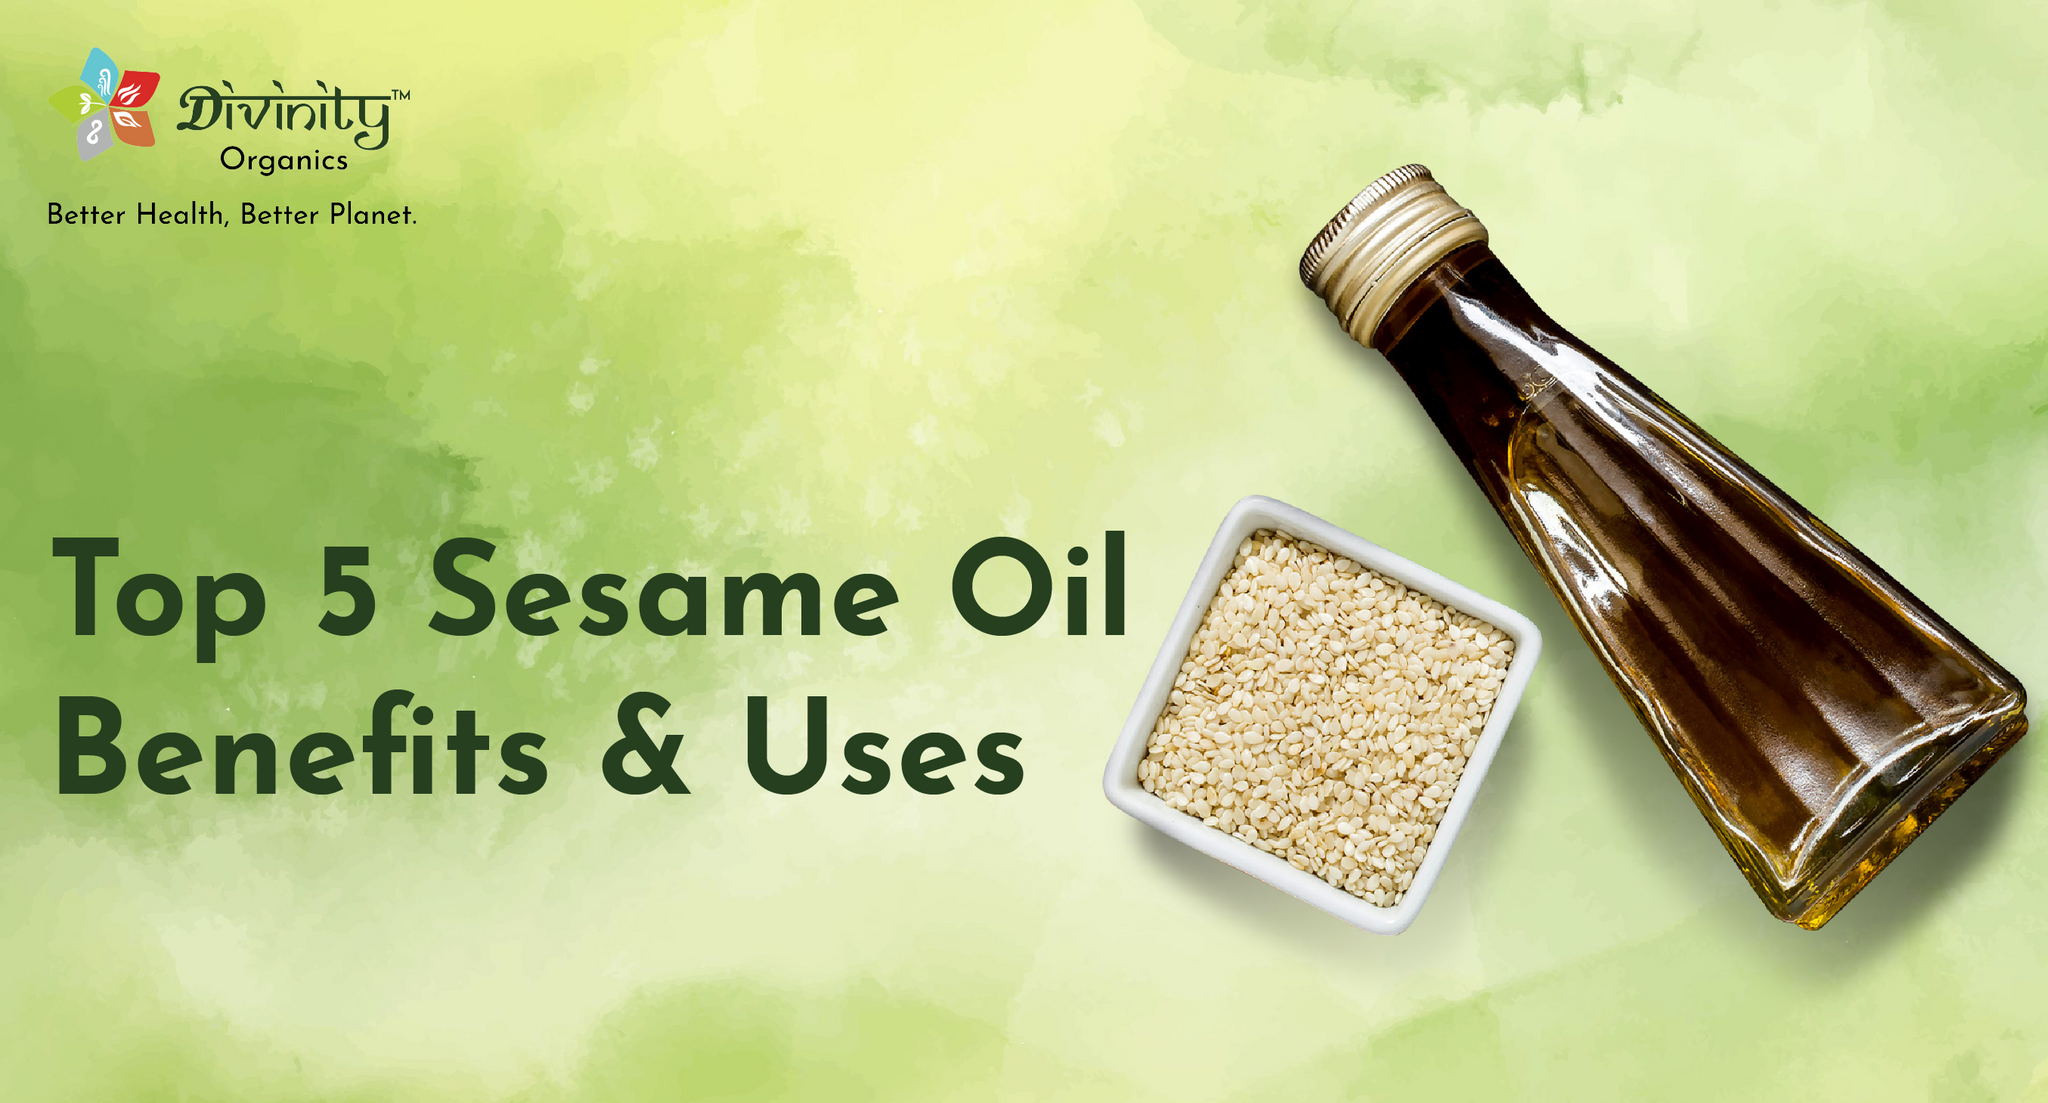 Top 5 Cold Pressed Organic Sesame Oil Benefits and Uses | Divinity Organics